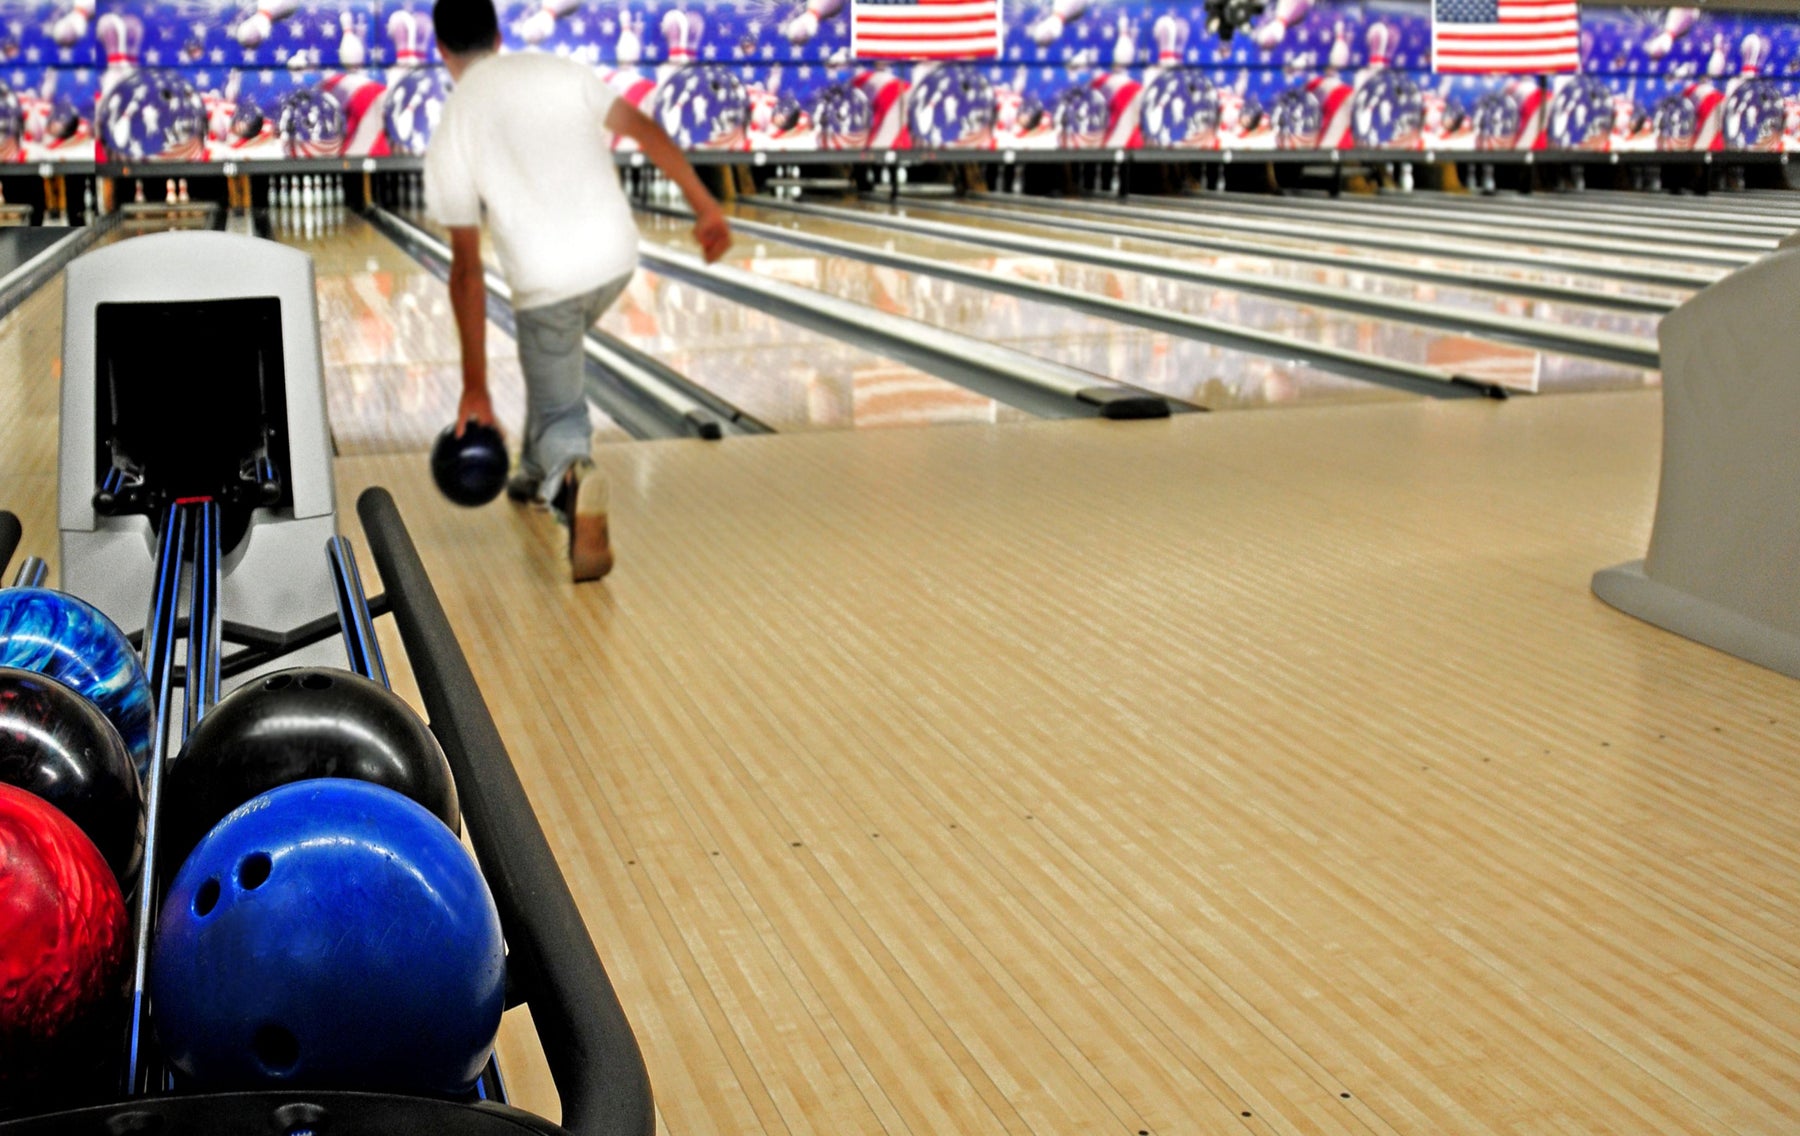 Things You Need To Know About Starting a Bowling League